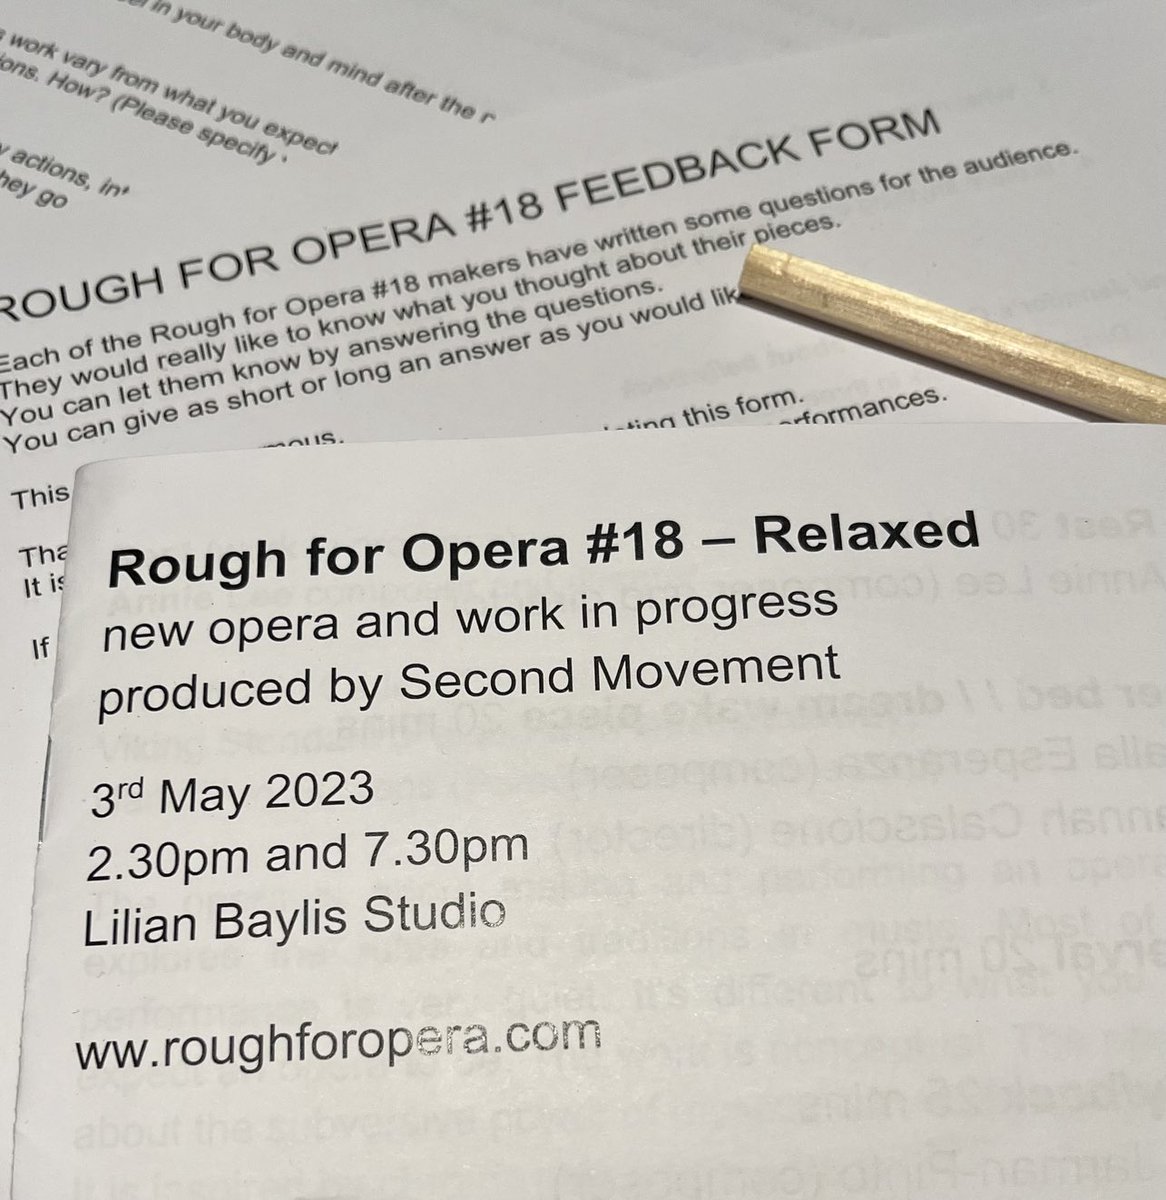 If you came to Rough for Opera #18 and would like to share some feedback the form is still live at roughforopera.com/feedback-form-…